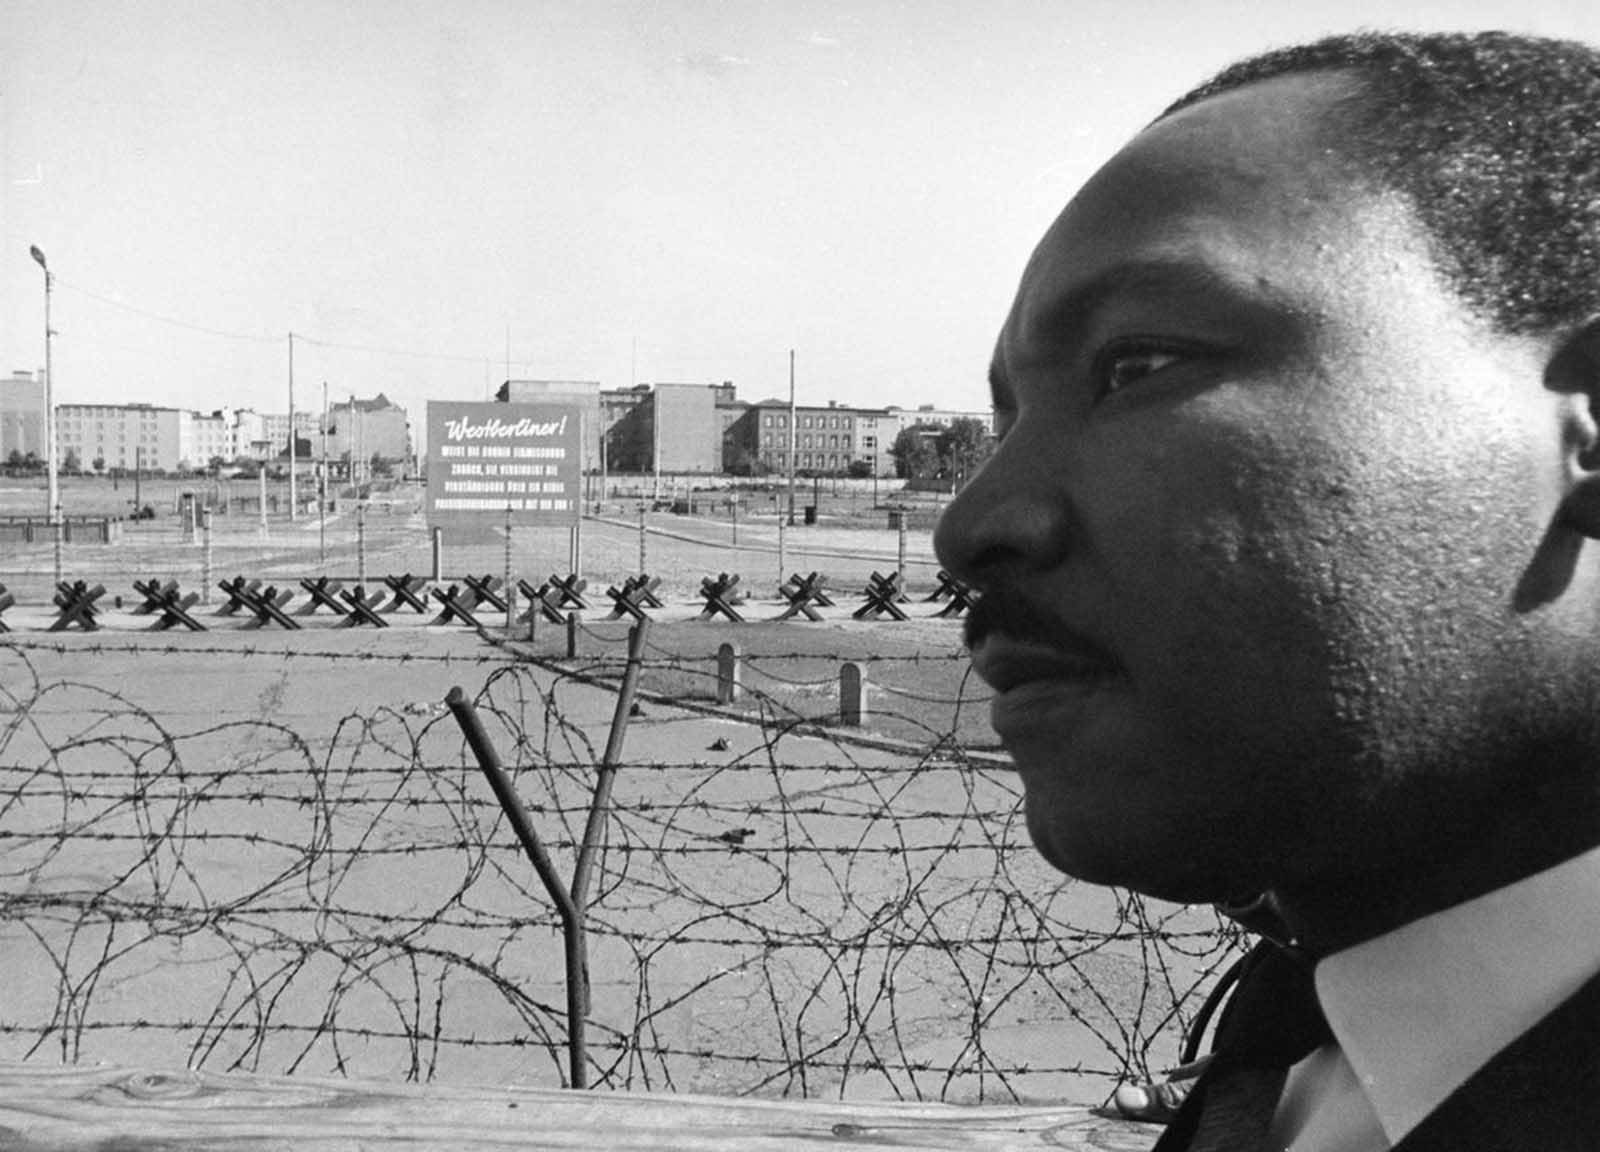 Reverend Martin Luther King, American civil rights leader, invited to Berlin by West Berlin Mayor Willy Brandt, visits the wall on September 13, 1964, at the border Potsdamer Platz in West Berlin.